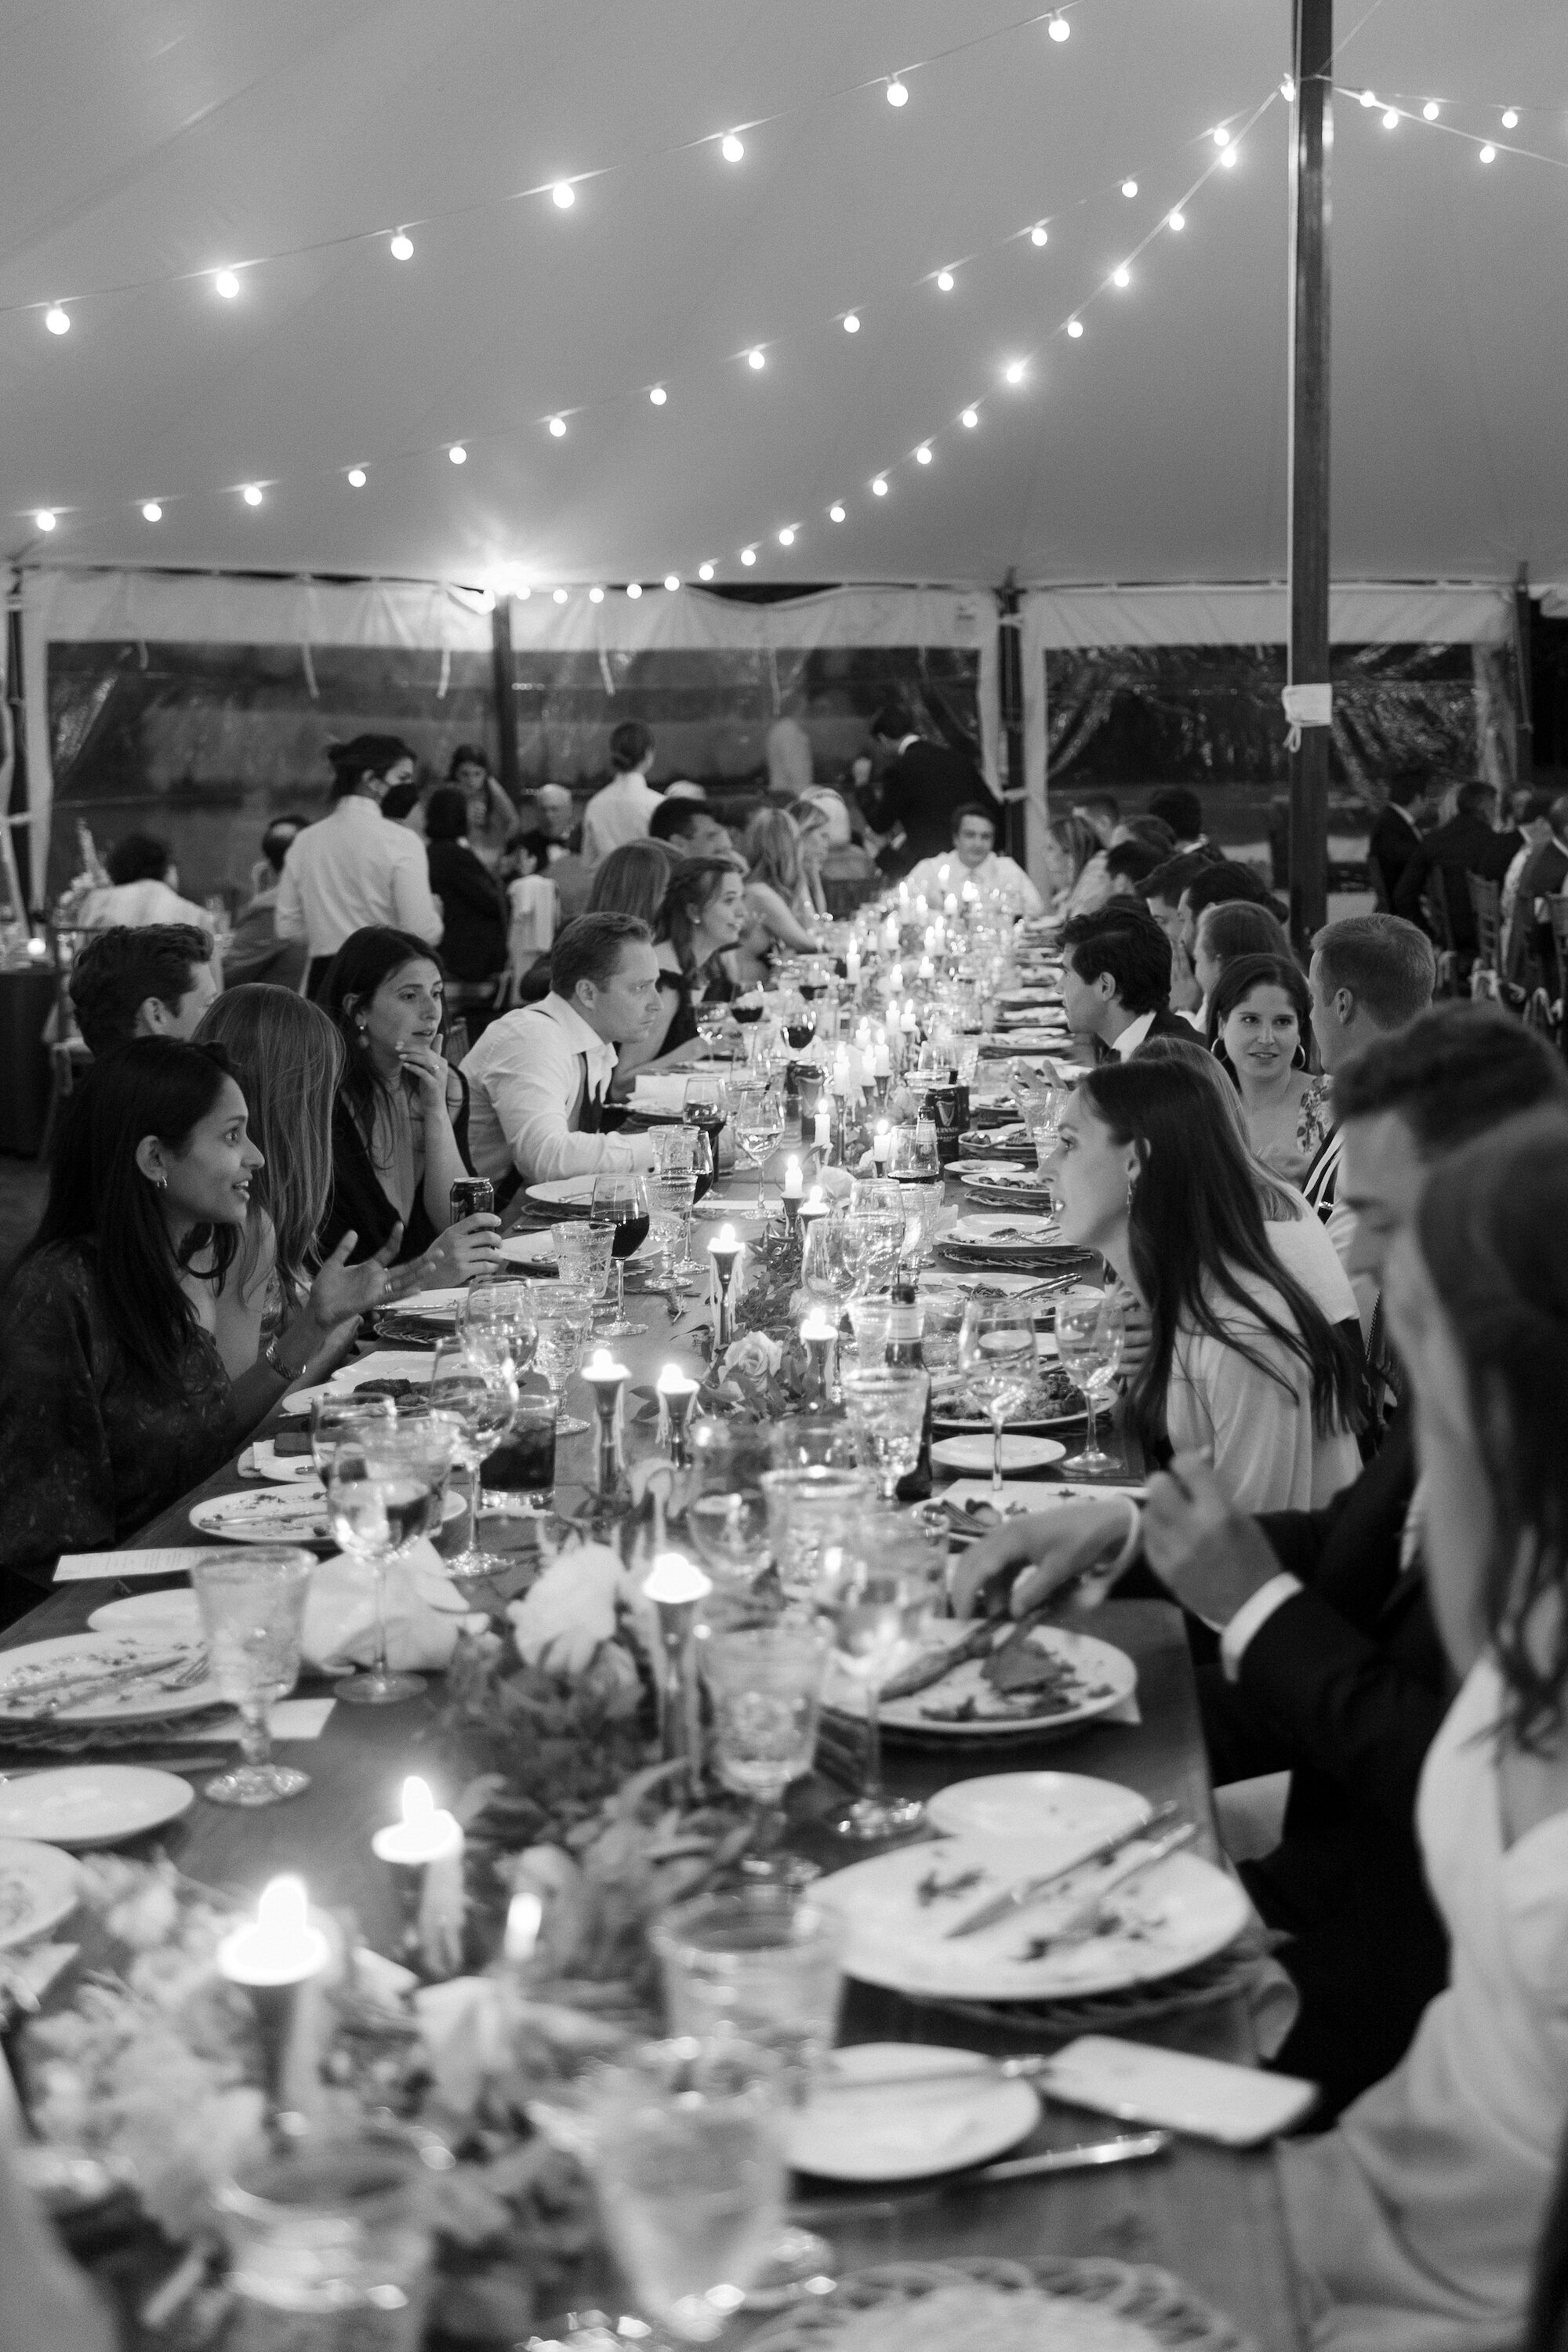 guests enjoy dinner at tented wedding by candlelight in black and white in the Catskills